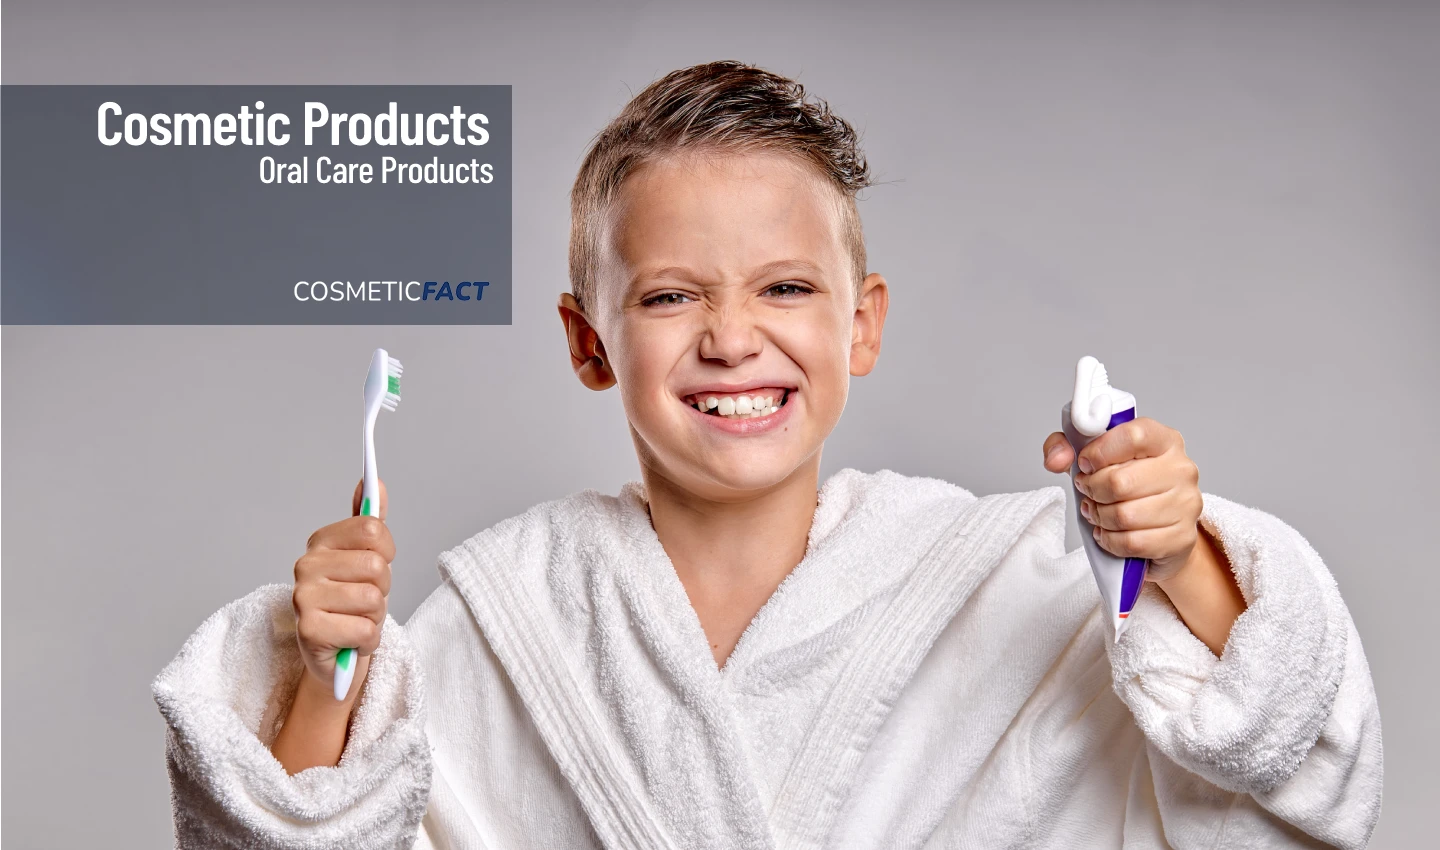 A smiling young boy holds his toothpaste and toothbrush, showcasing the importance of Kids' Oral Care in maintaining healthy teeth and gums.